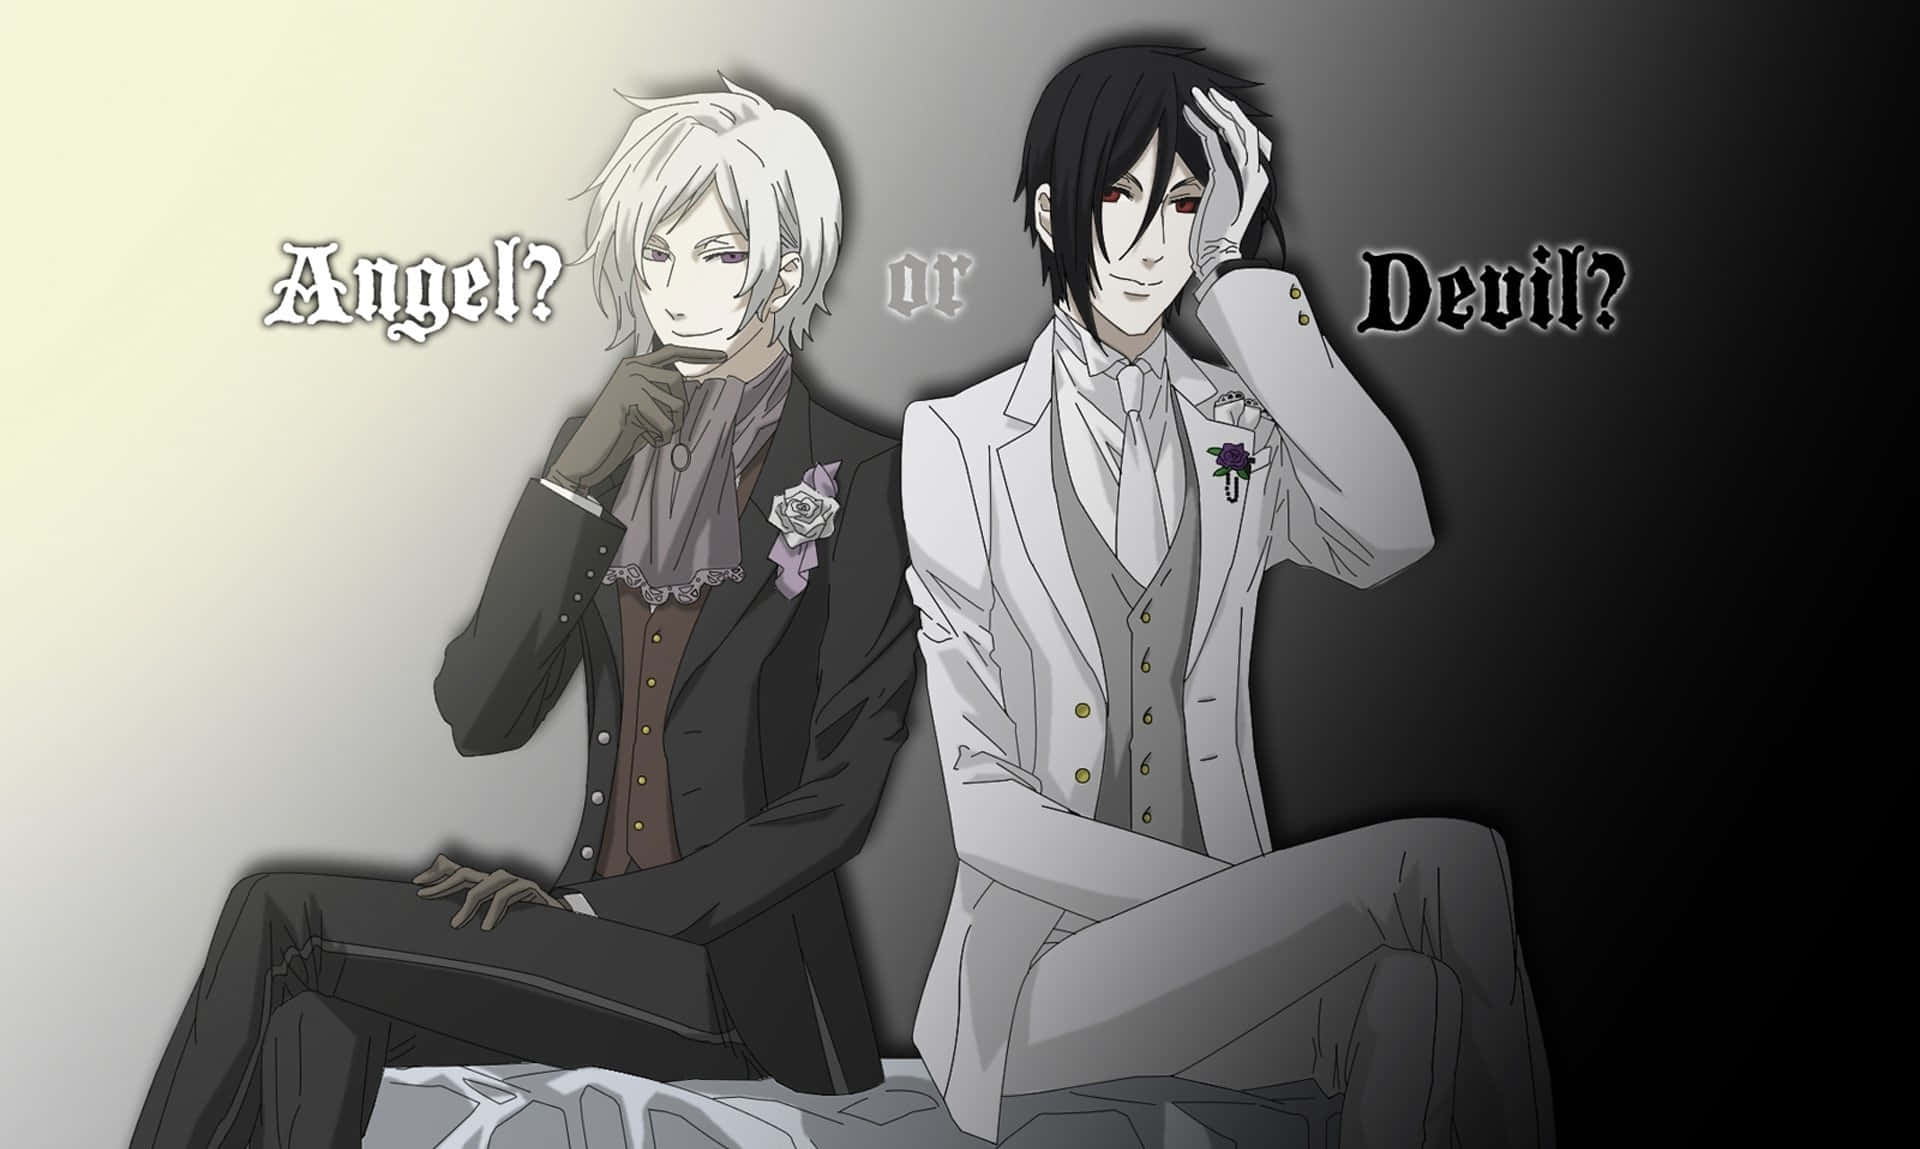 "Plumet in the darkness with Sebastian from Black Butler"